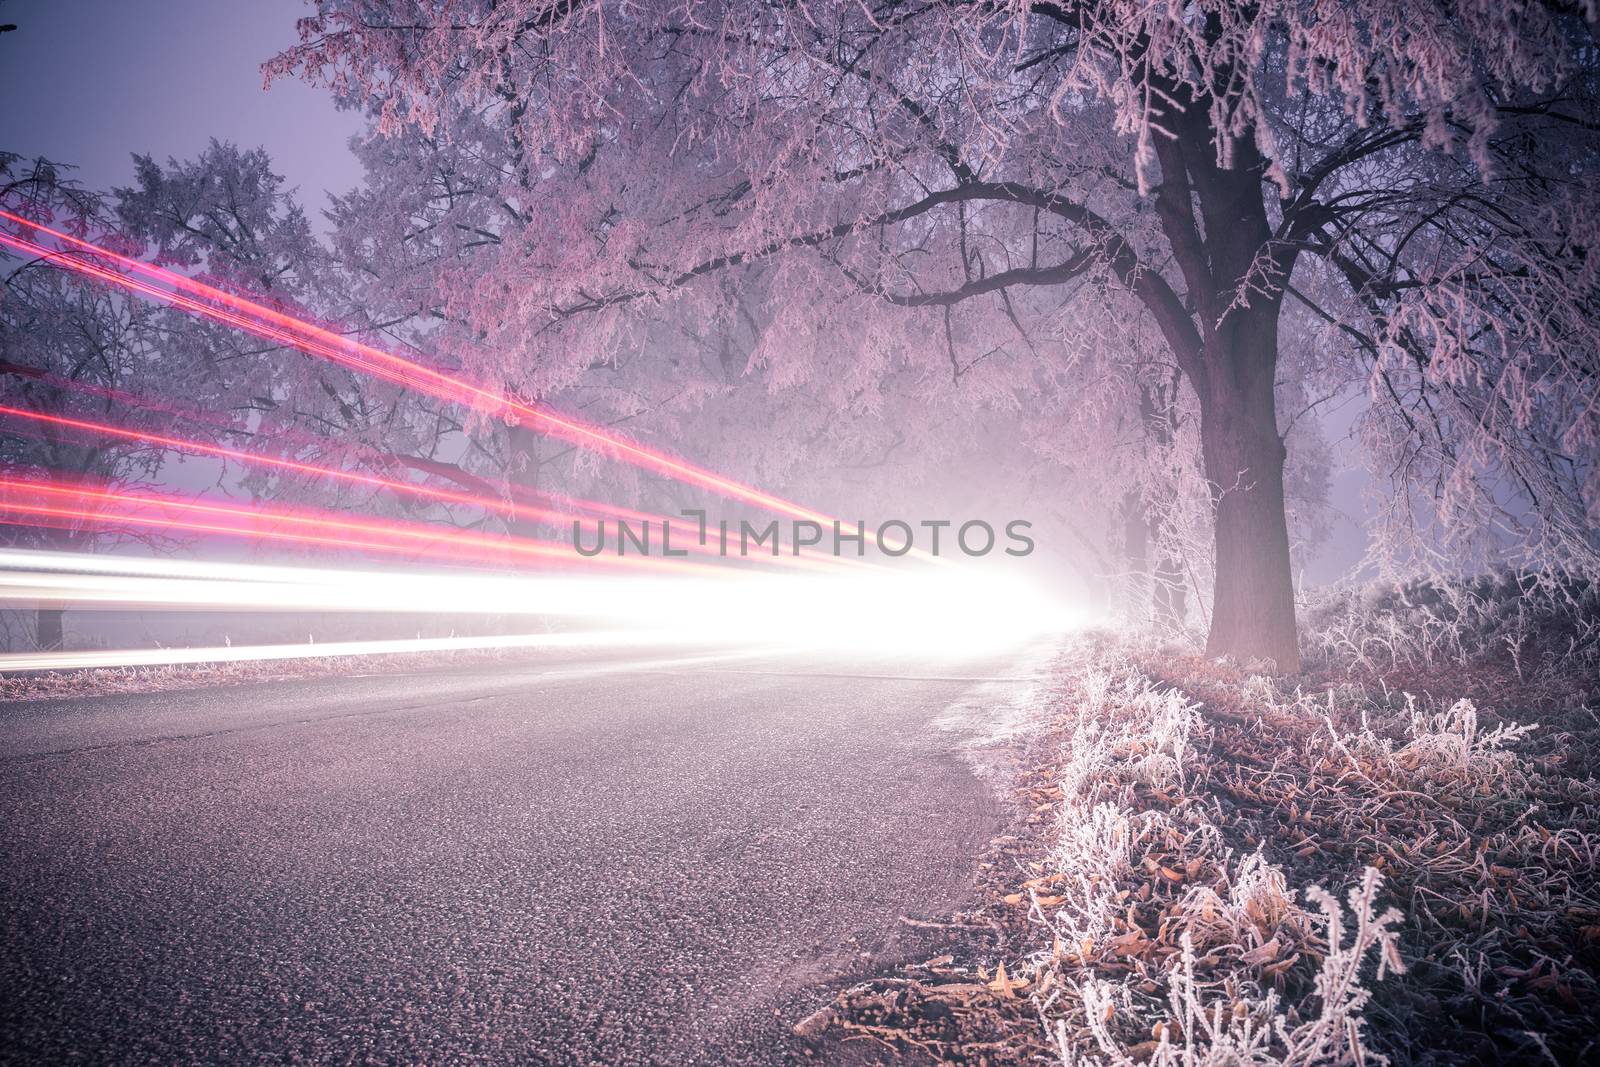 Light trails at night in winter, frozen road in forrest.